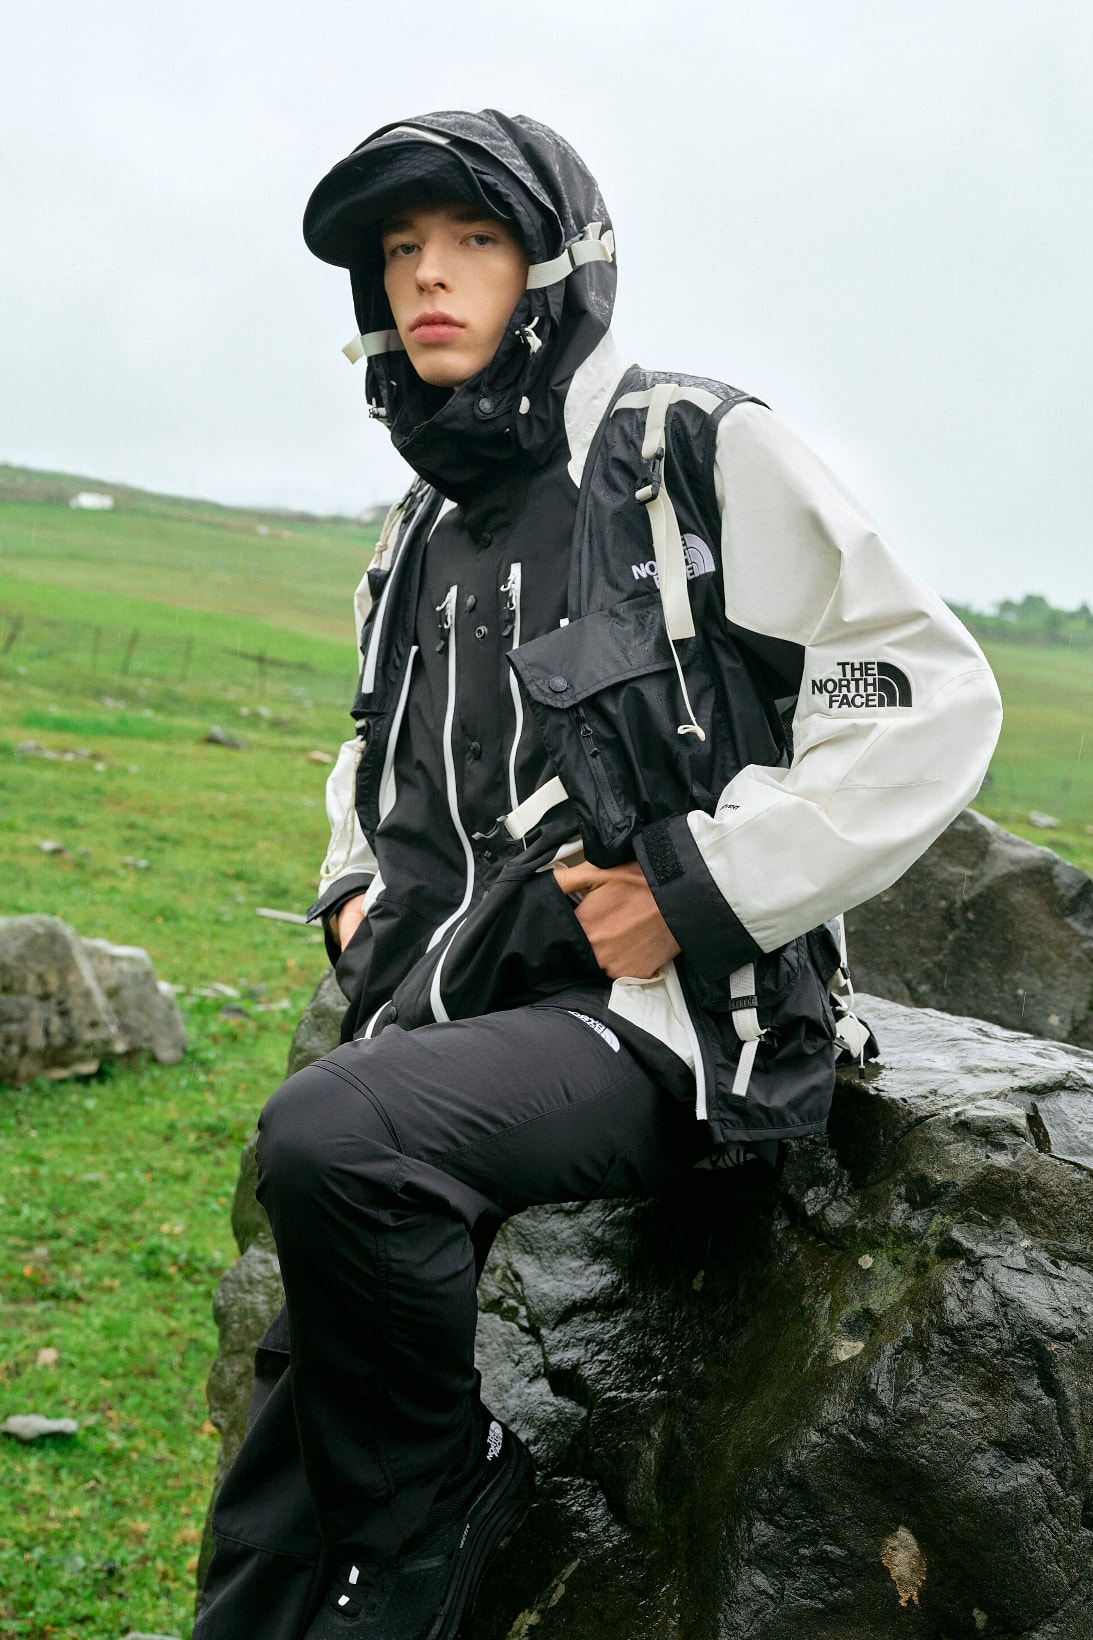 The North Face Urban Ecology Collection 